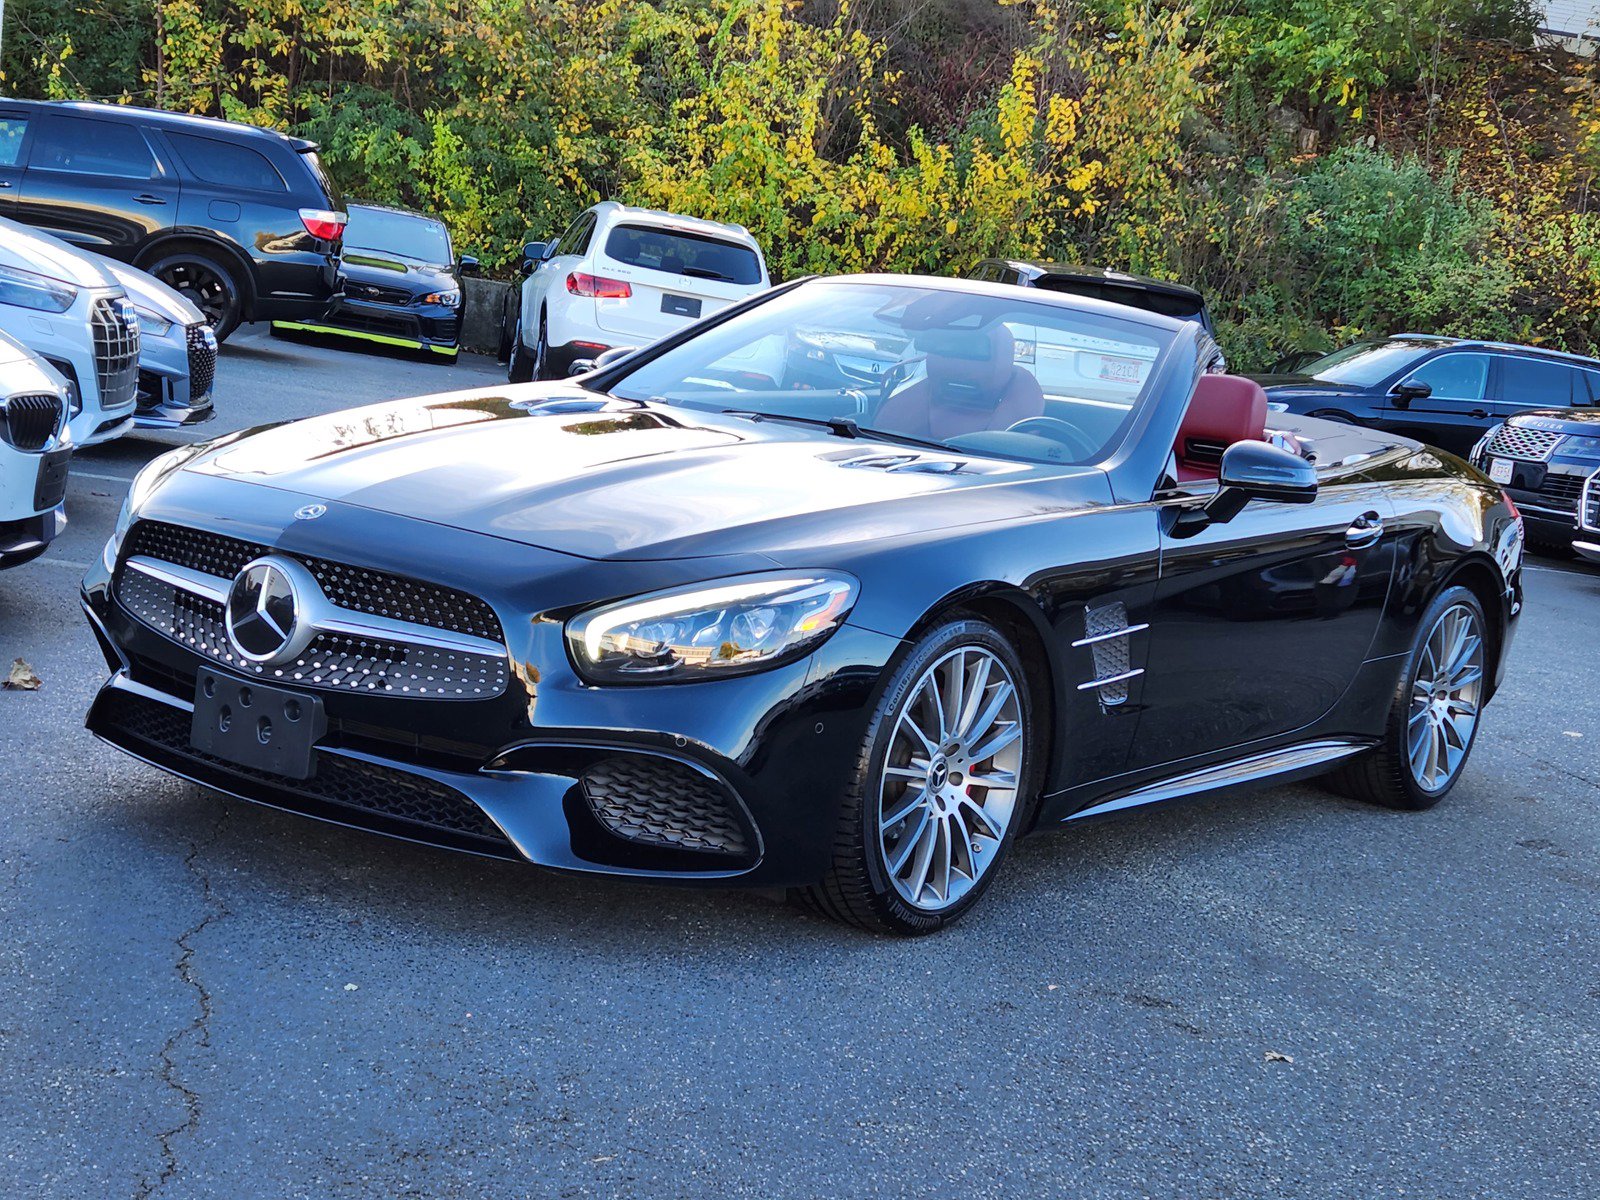 Used 2018 Mercedes-Benz SL 450 for Sale Right Now - Autotrader